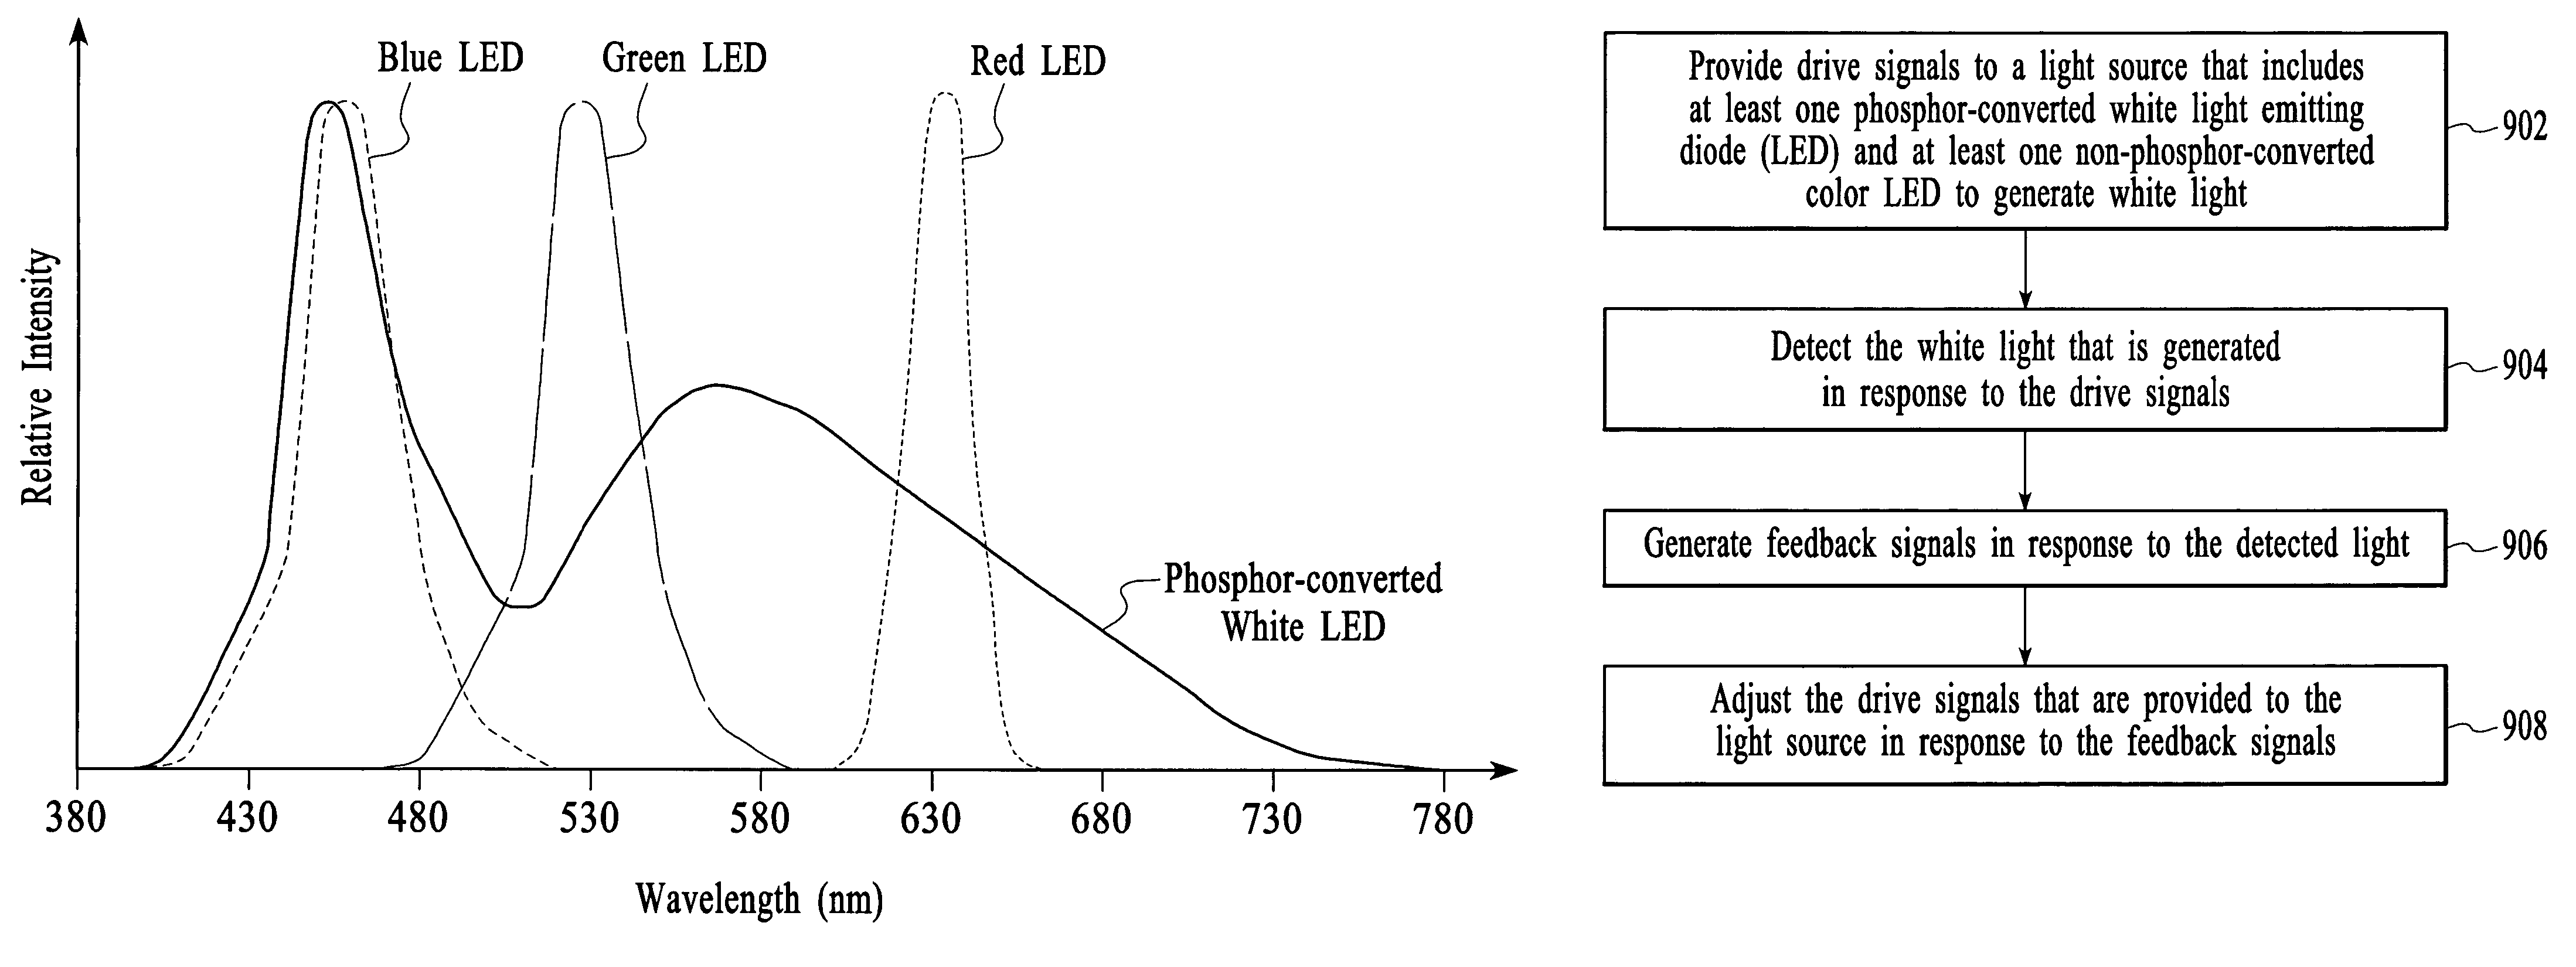 System and method for producing white light using a combination of phosphor-converted white LEDs and non-phosphor-converted color LEDs